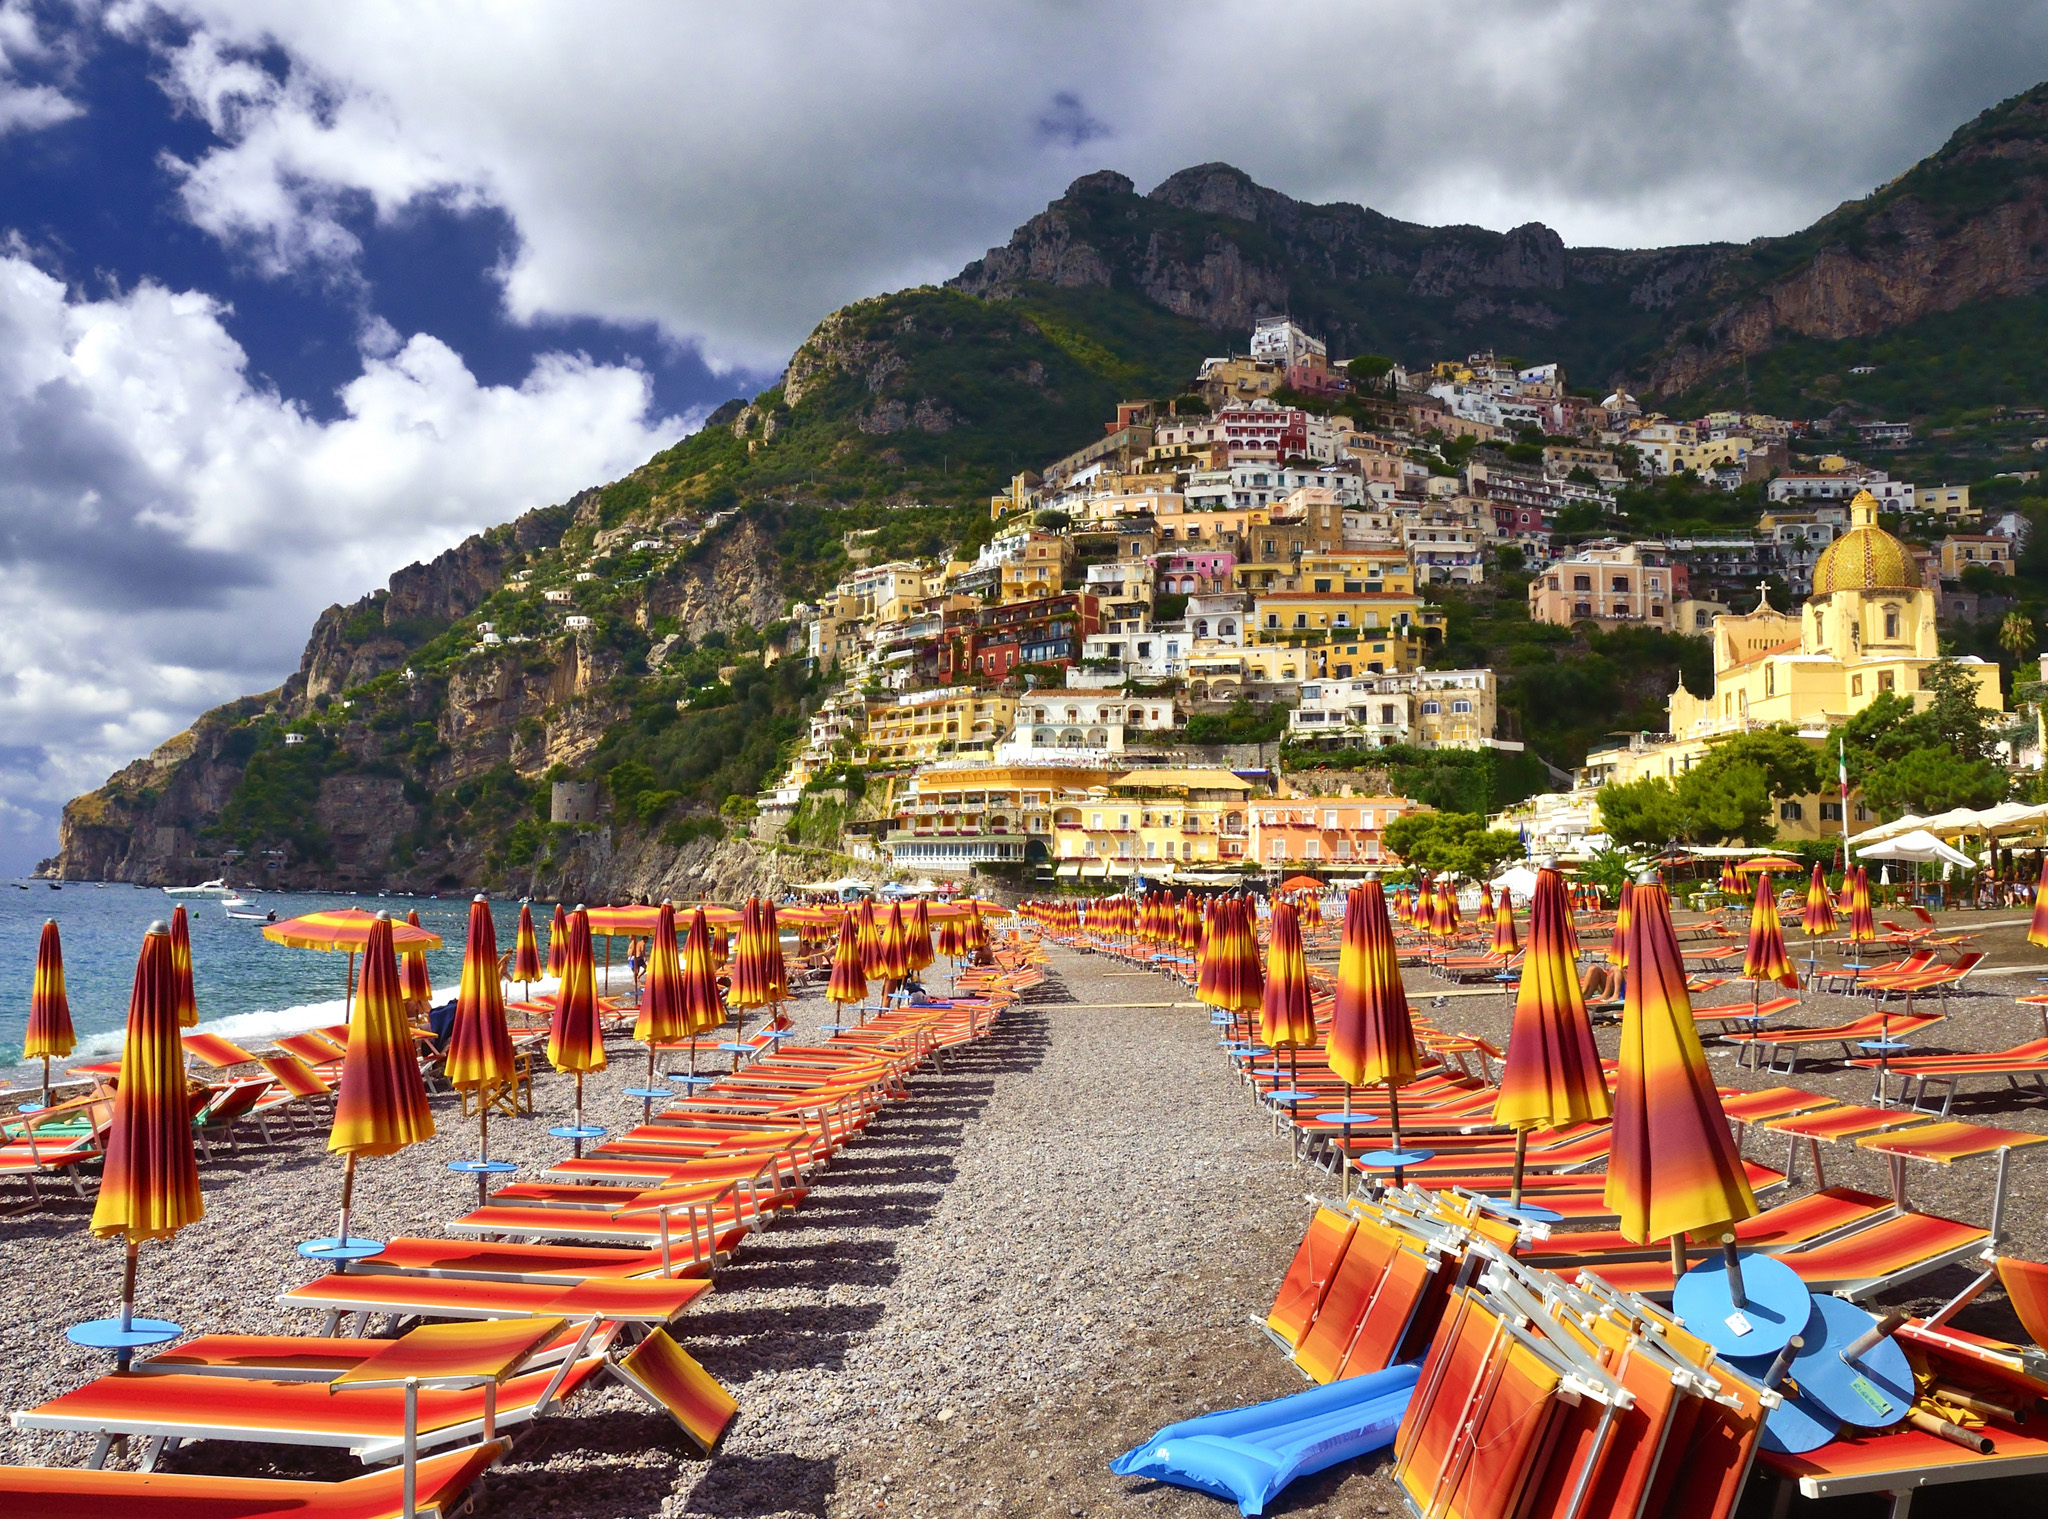 Clinging to the hillside Positano is a stunning backdrop to the sandy beach - photo 5